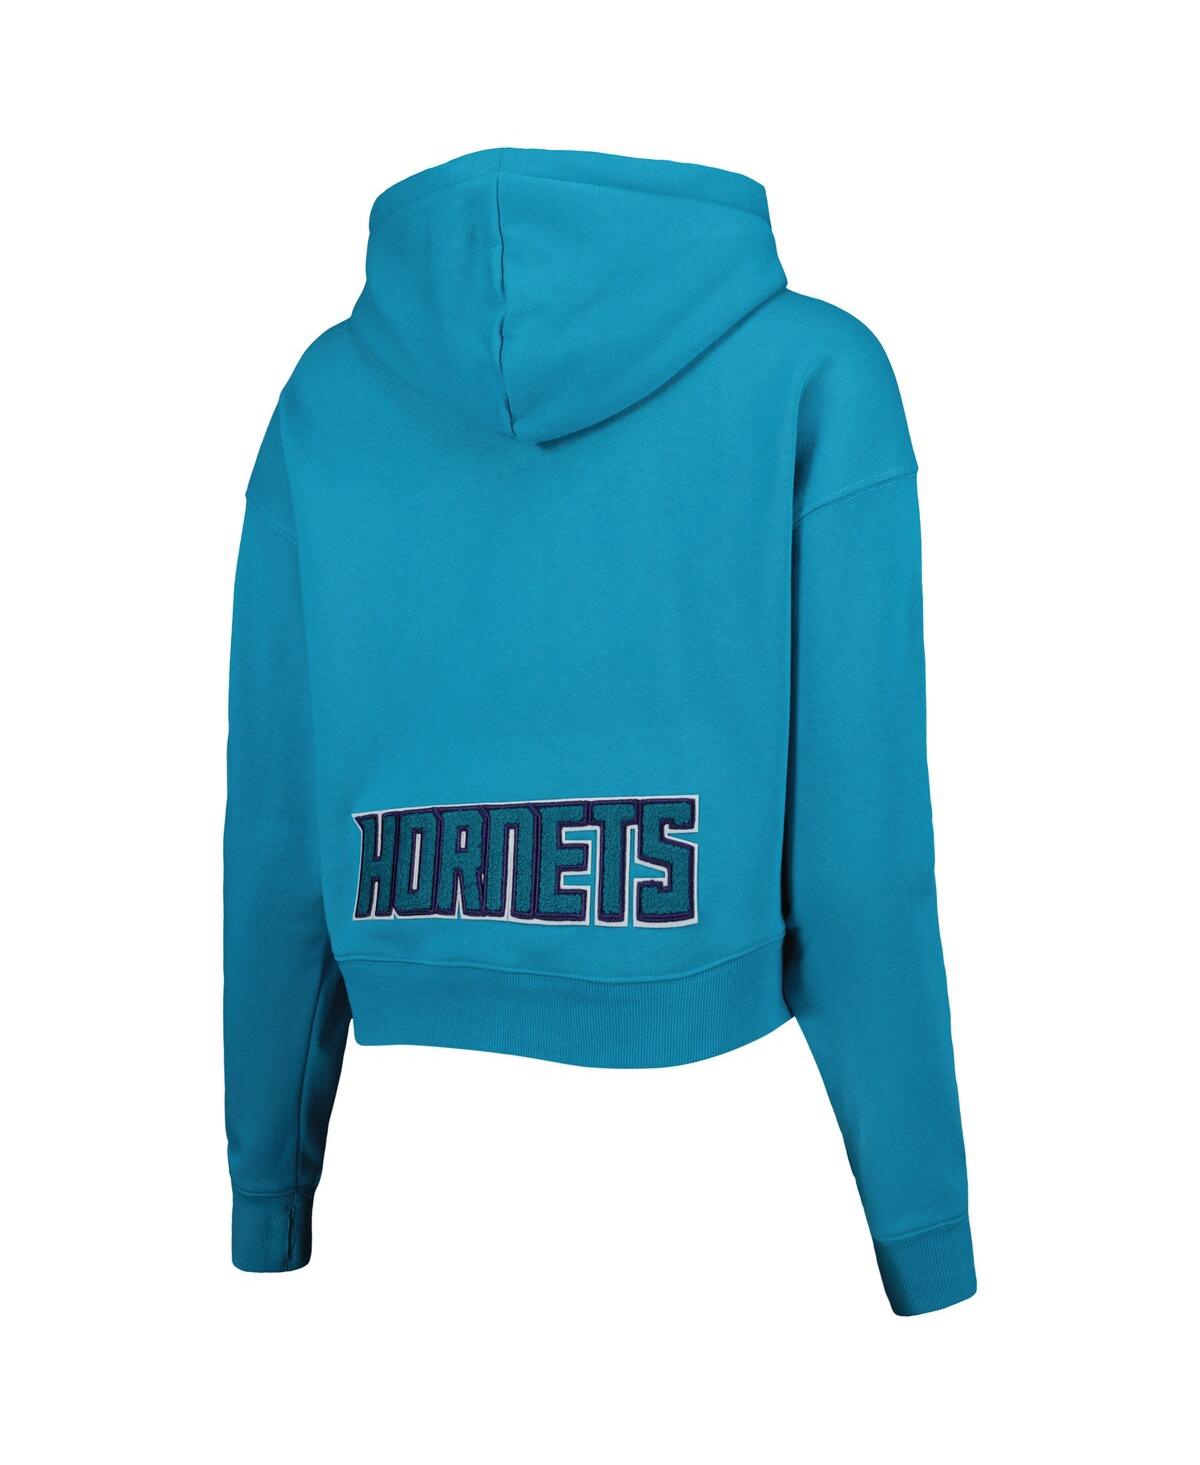 Shop Pro Standard Women's  Teal Charlotte Hornets Classic Fleece Cropped Pullover Hoodie